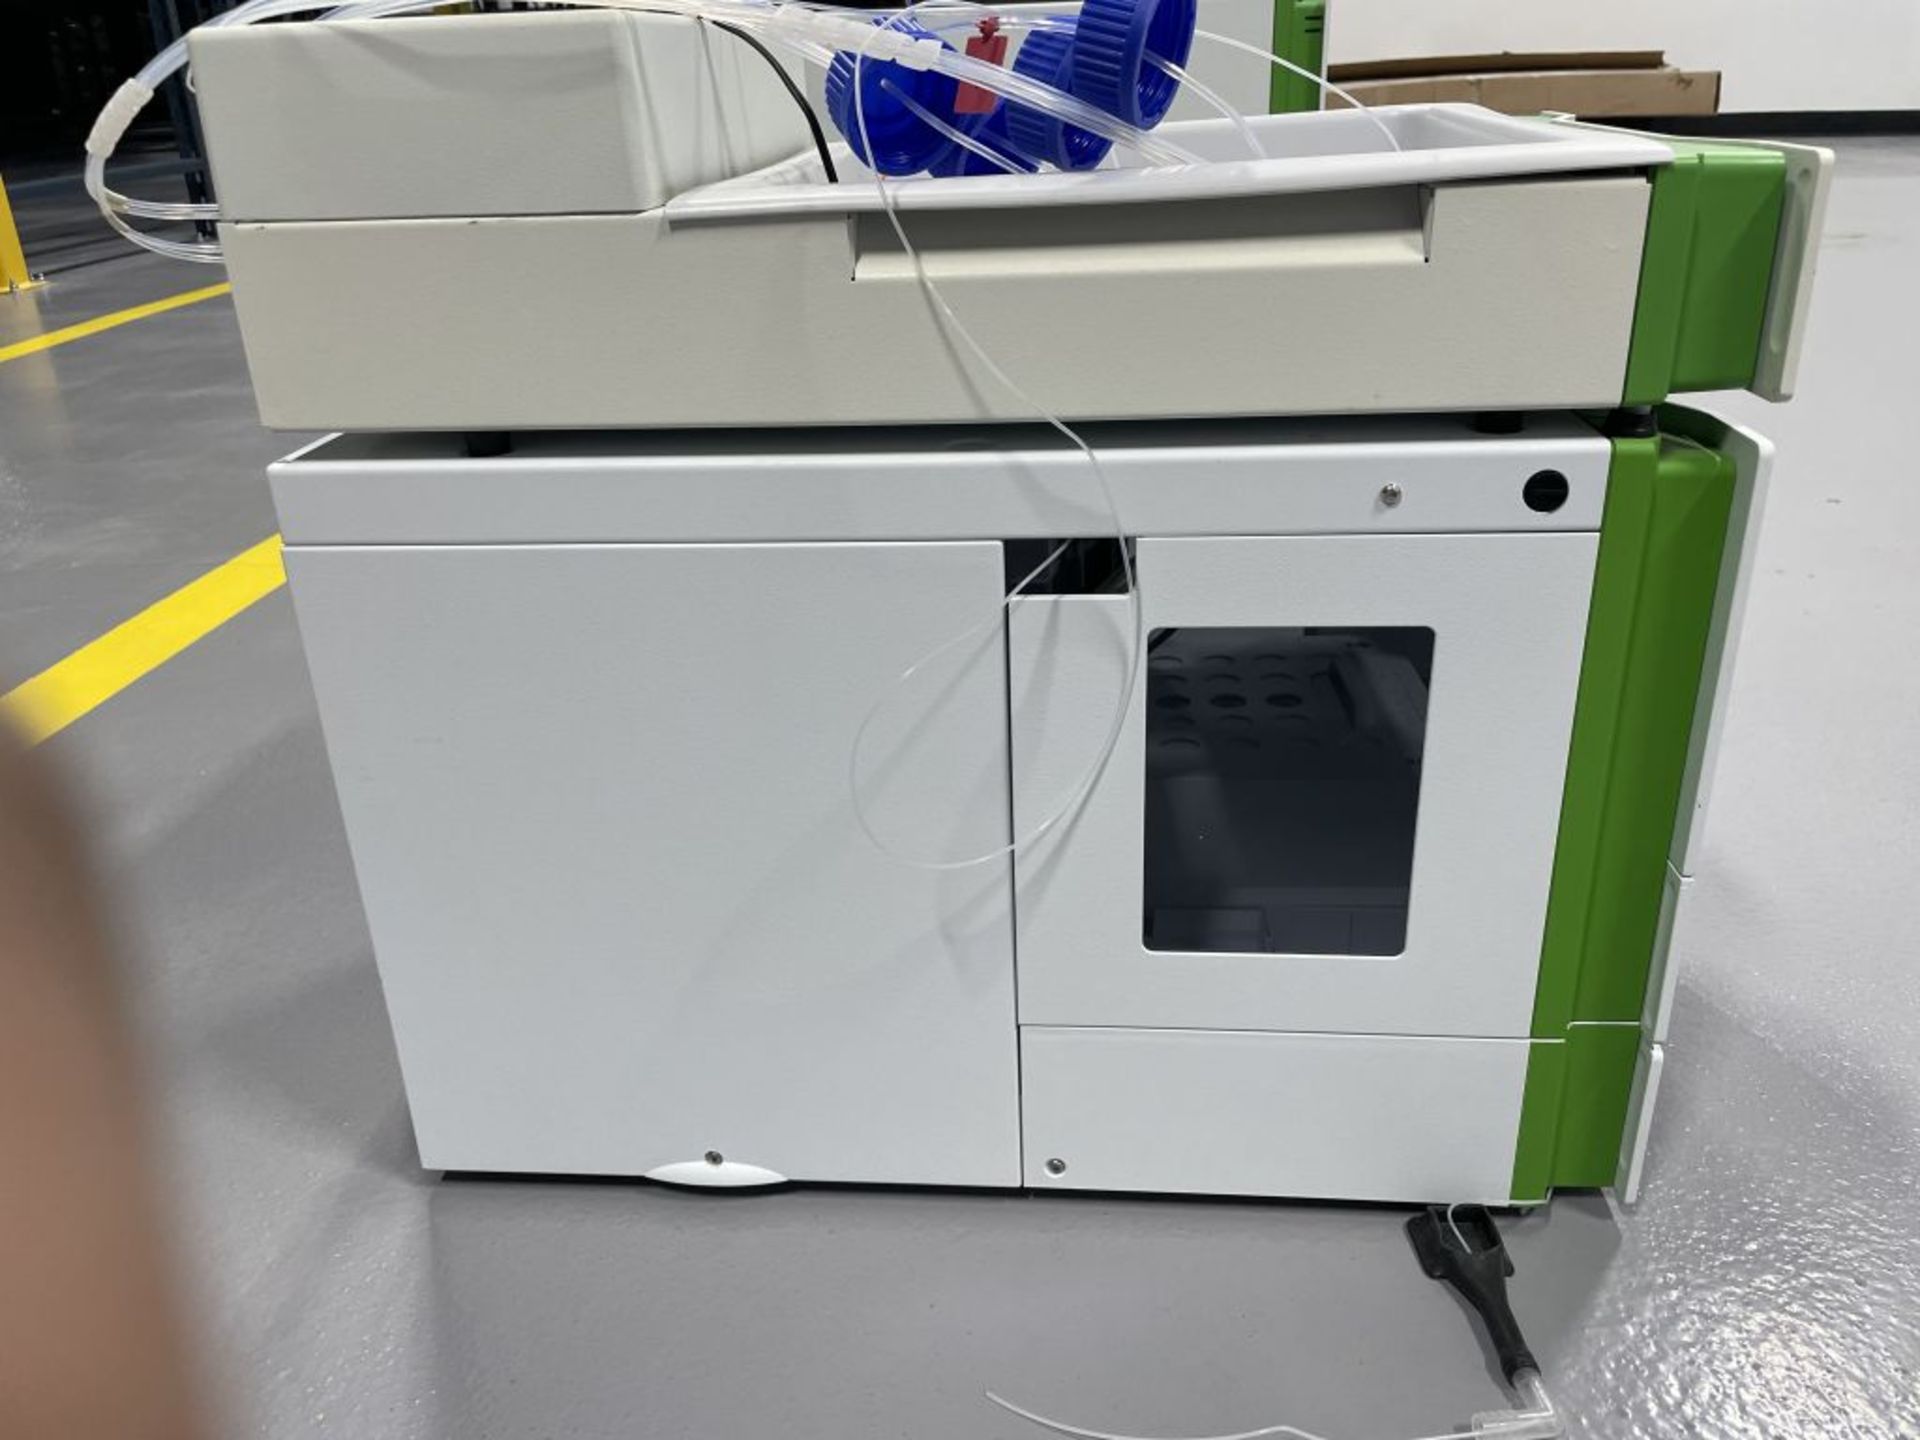 Perkin Elmer UHPLC unit. This is an ultra-high performance chromatography (UHPLC). As shown in - Image 9 of 9